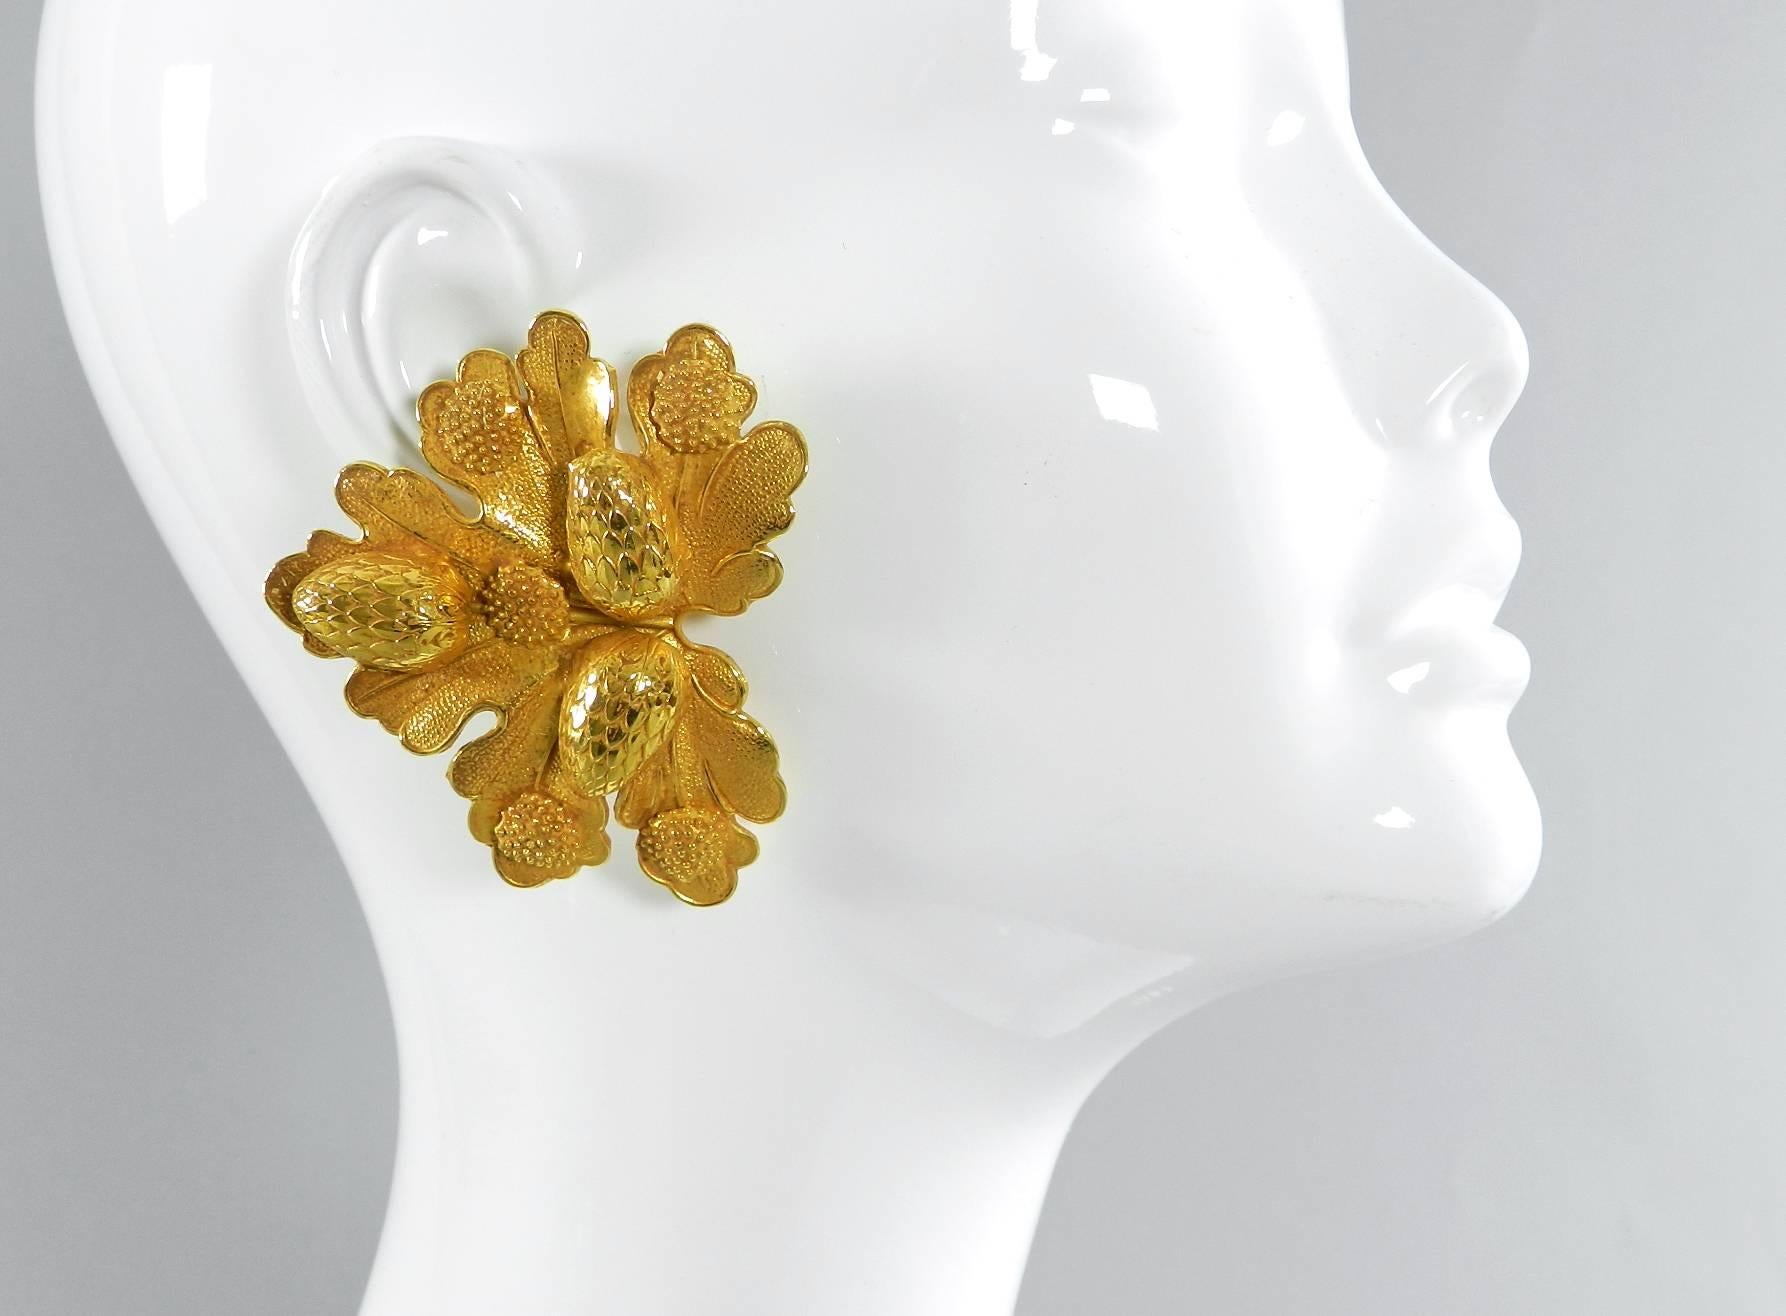 Vintage circa 1980's Dominique Aurientis large statement earrings. Leaf and berries design in gilt gold. Clip on. Measures about 2.75 x 2.5